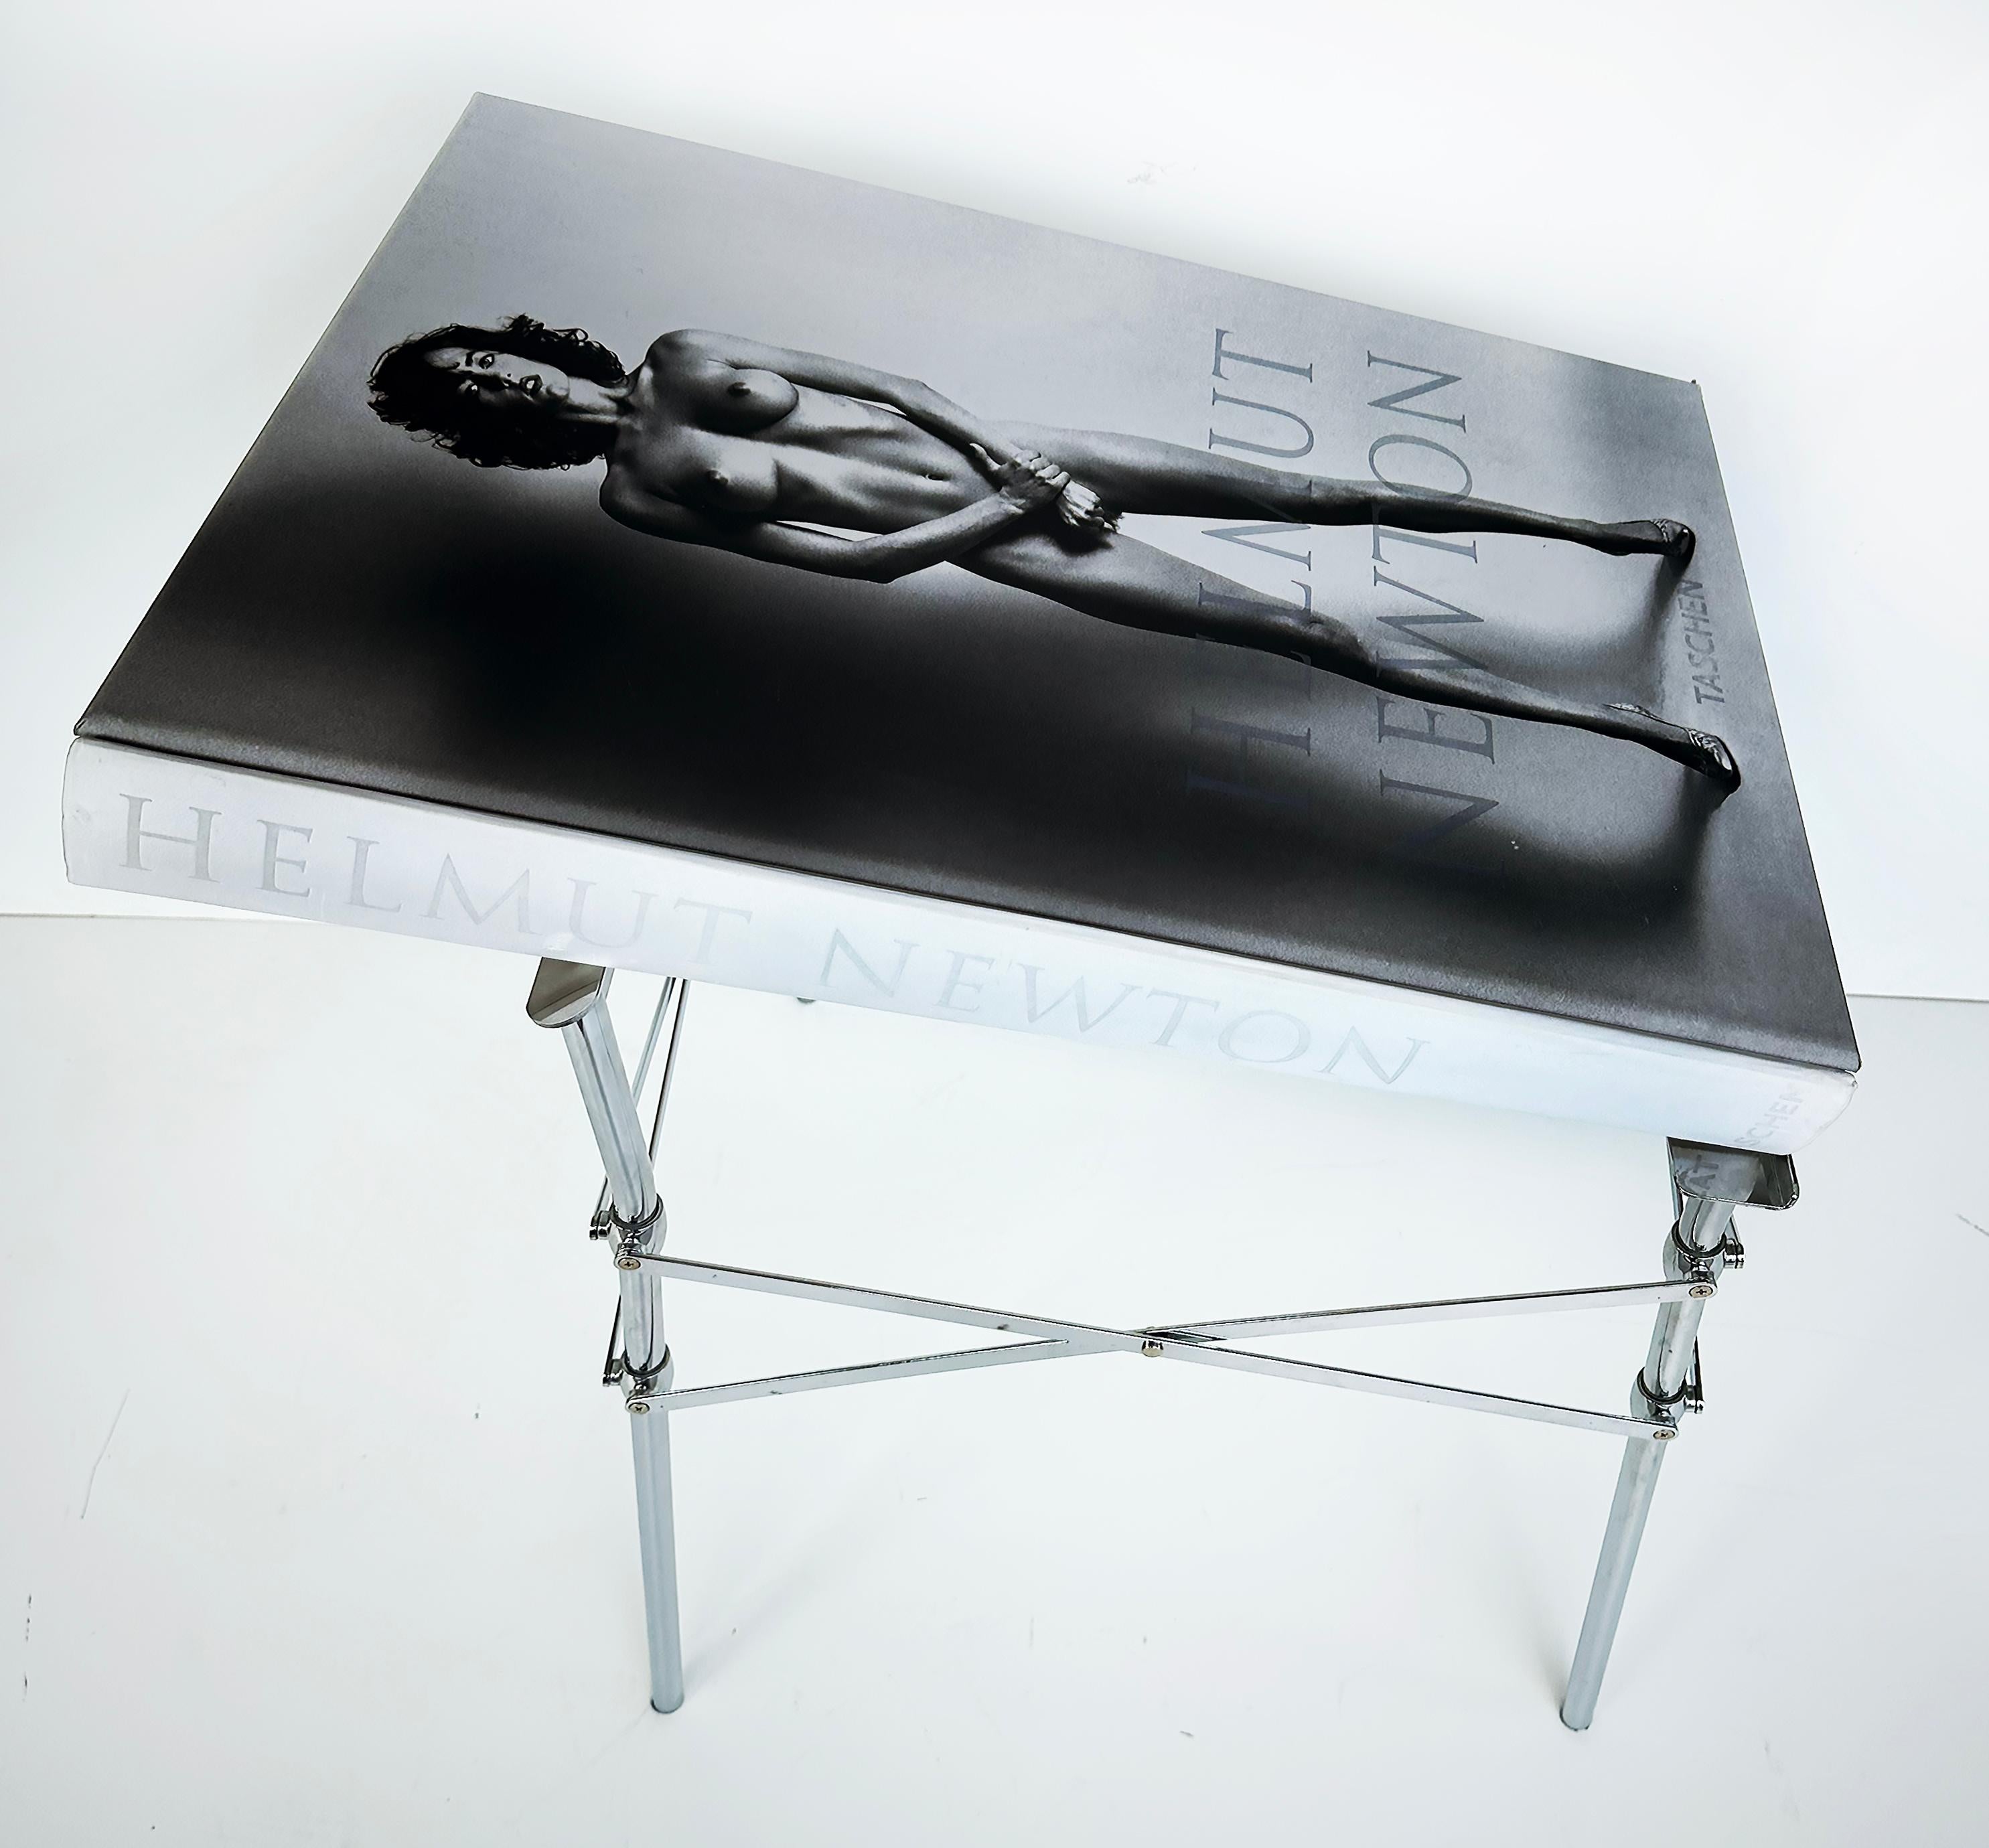 Helmut Newton Sumo Taschen Book, Philippe Starck Stand, Signed Limited Edition For Sale 1